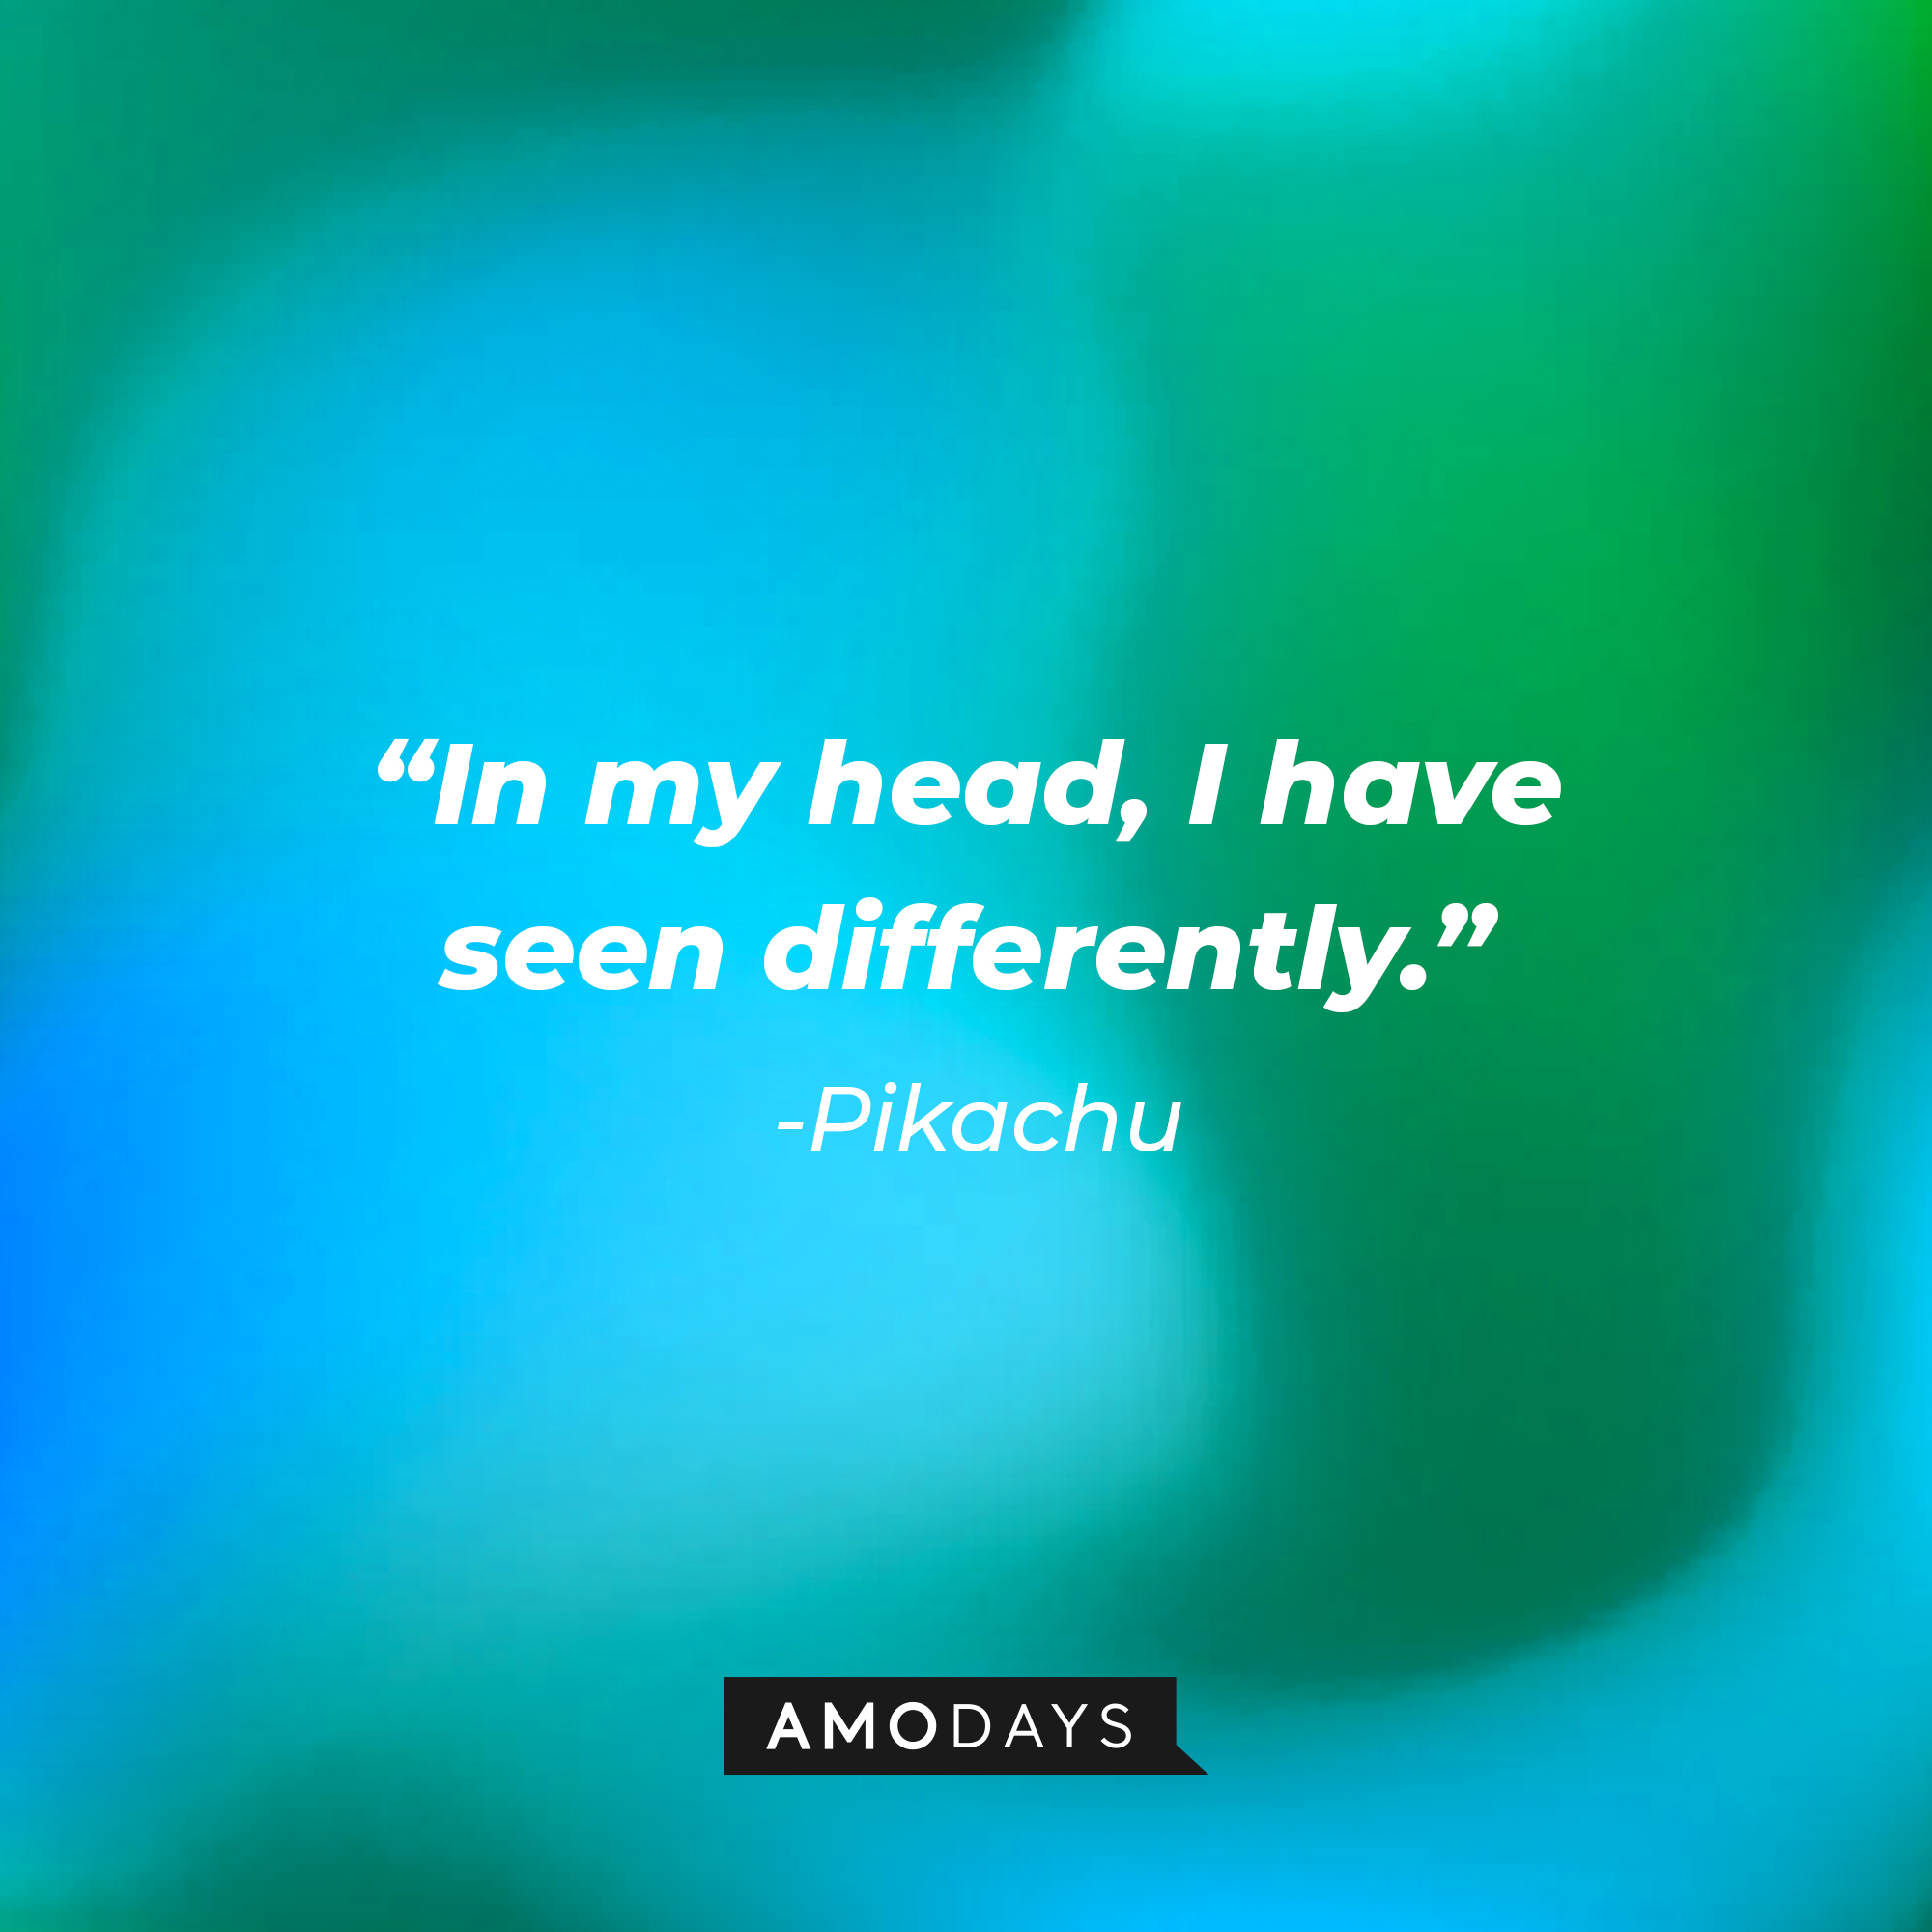 Pikachu's quote: "In my head, I have seen differently." | Source: AmoDays